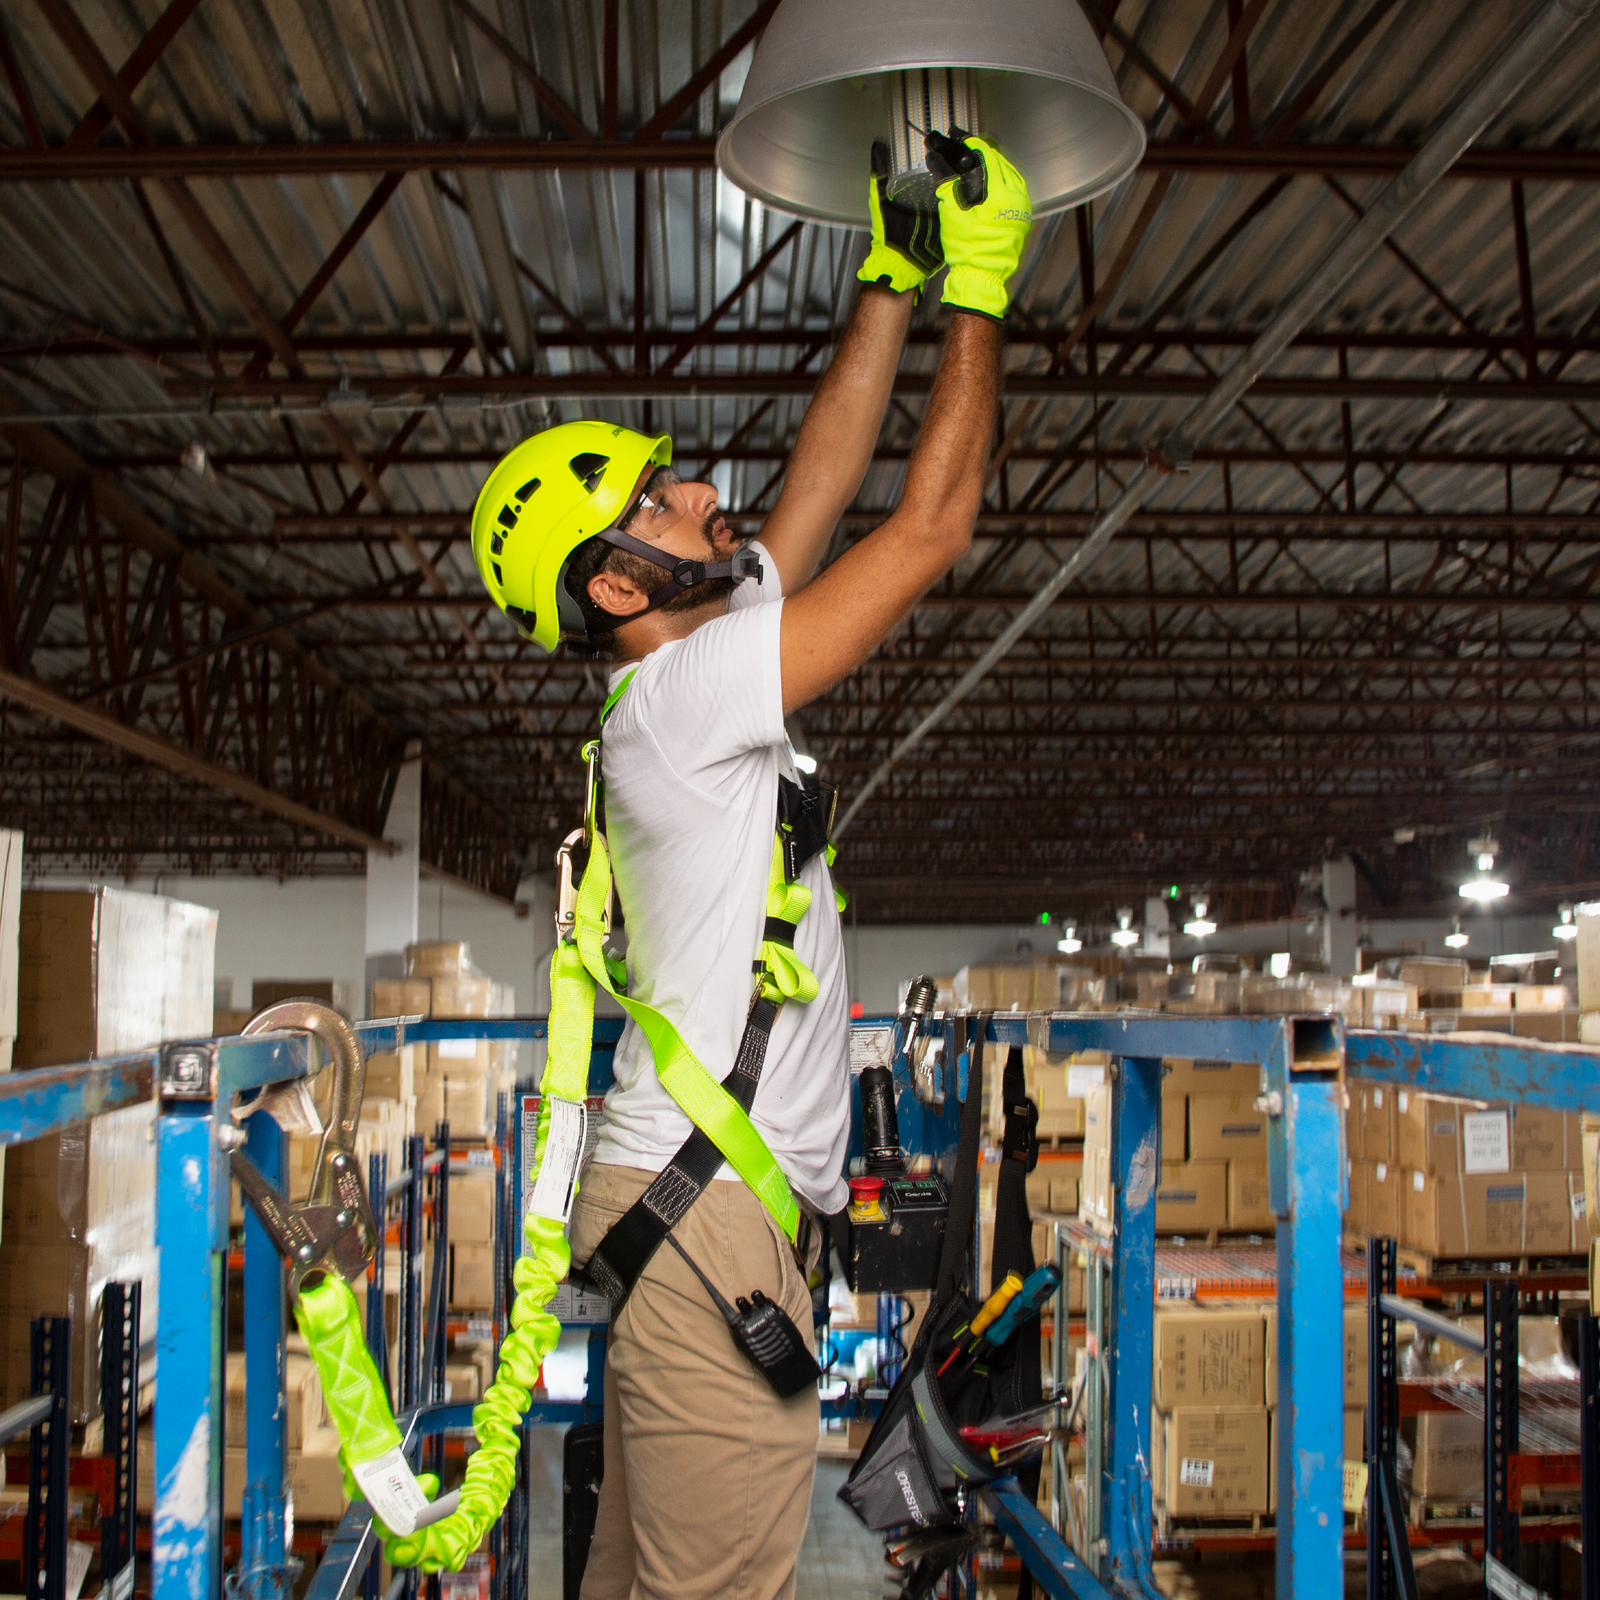 A man wearing the 1D ring JORESTECH fall protection safety body harness with grommets. He is standing on a lift while replacing light bulbs in a warehouse at 30 meters height. The man is attached to the structure of the lift by a lanyard hooked to the D ring of the JORESTECH harness and the metal structure of the lift.  There are rack, bins and brown card boxes bellow.